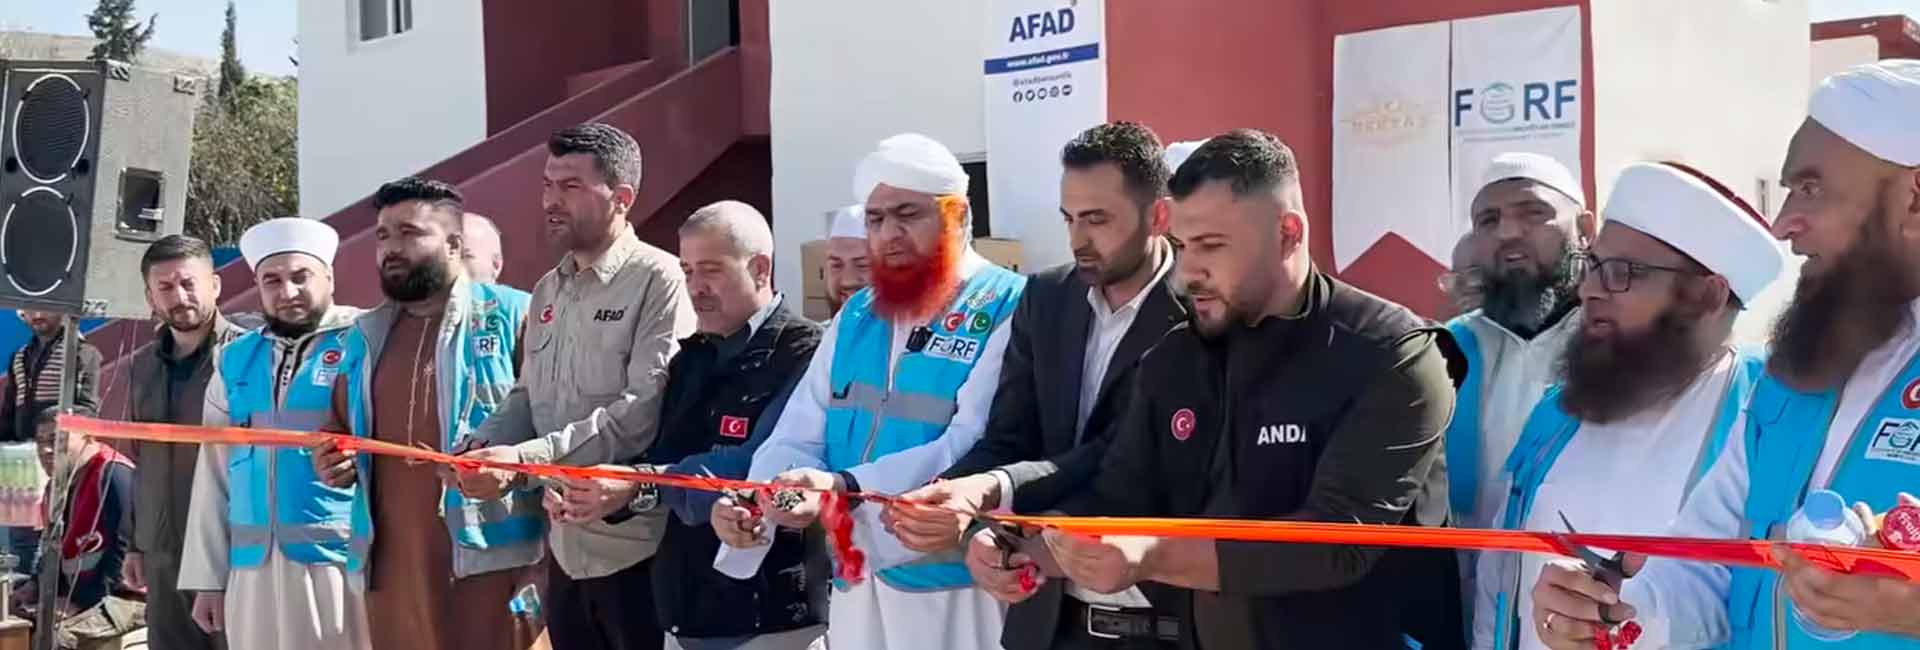 inauguration of orphanage in syria